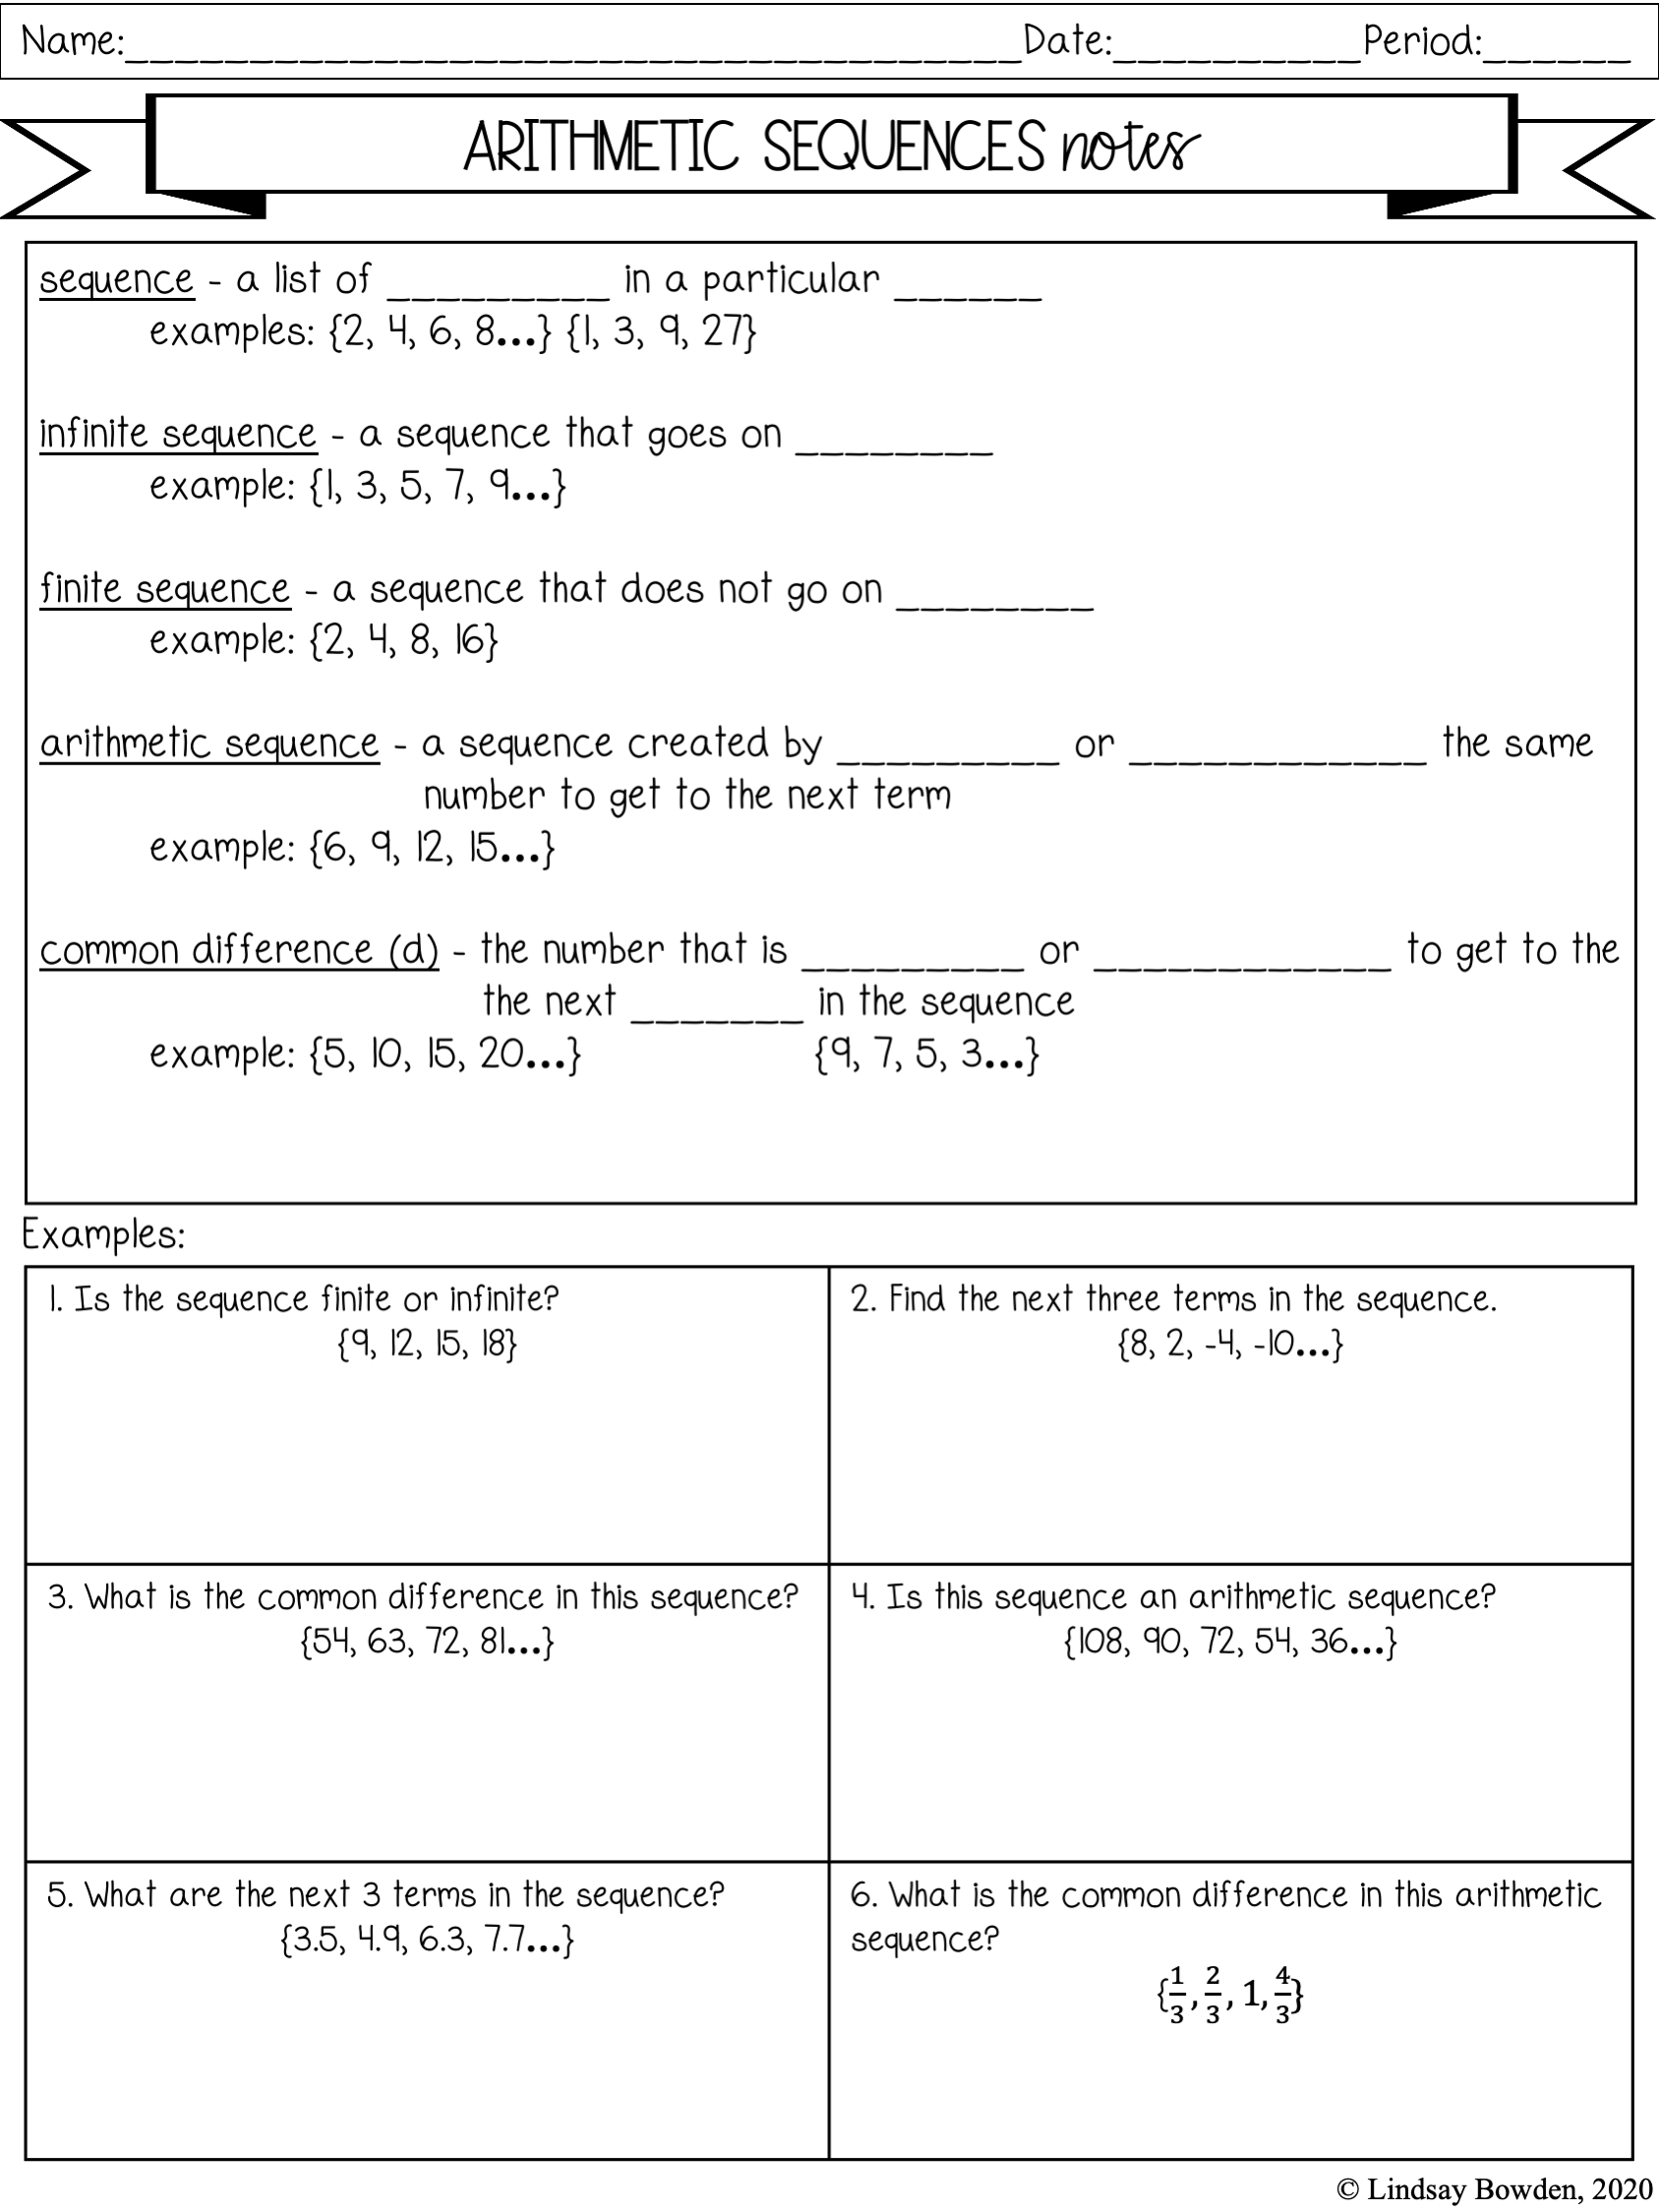 Arithmetic Sequences Notes and Worksheets - Lindsay Bowden Within Arithmetic Sequence Worksheet Algebra 1